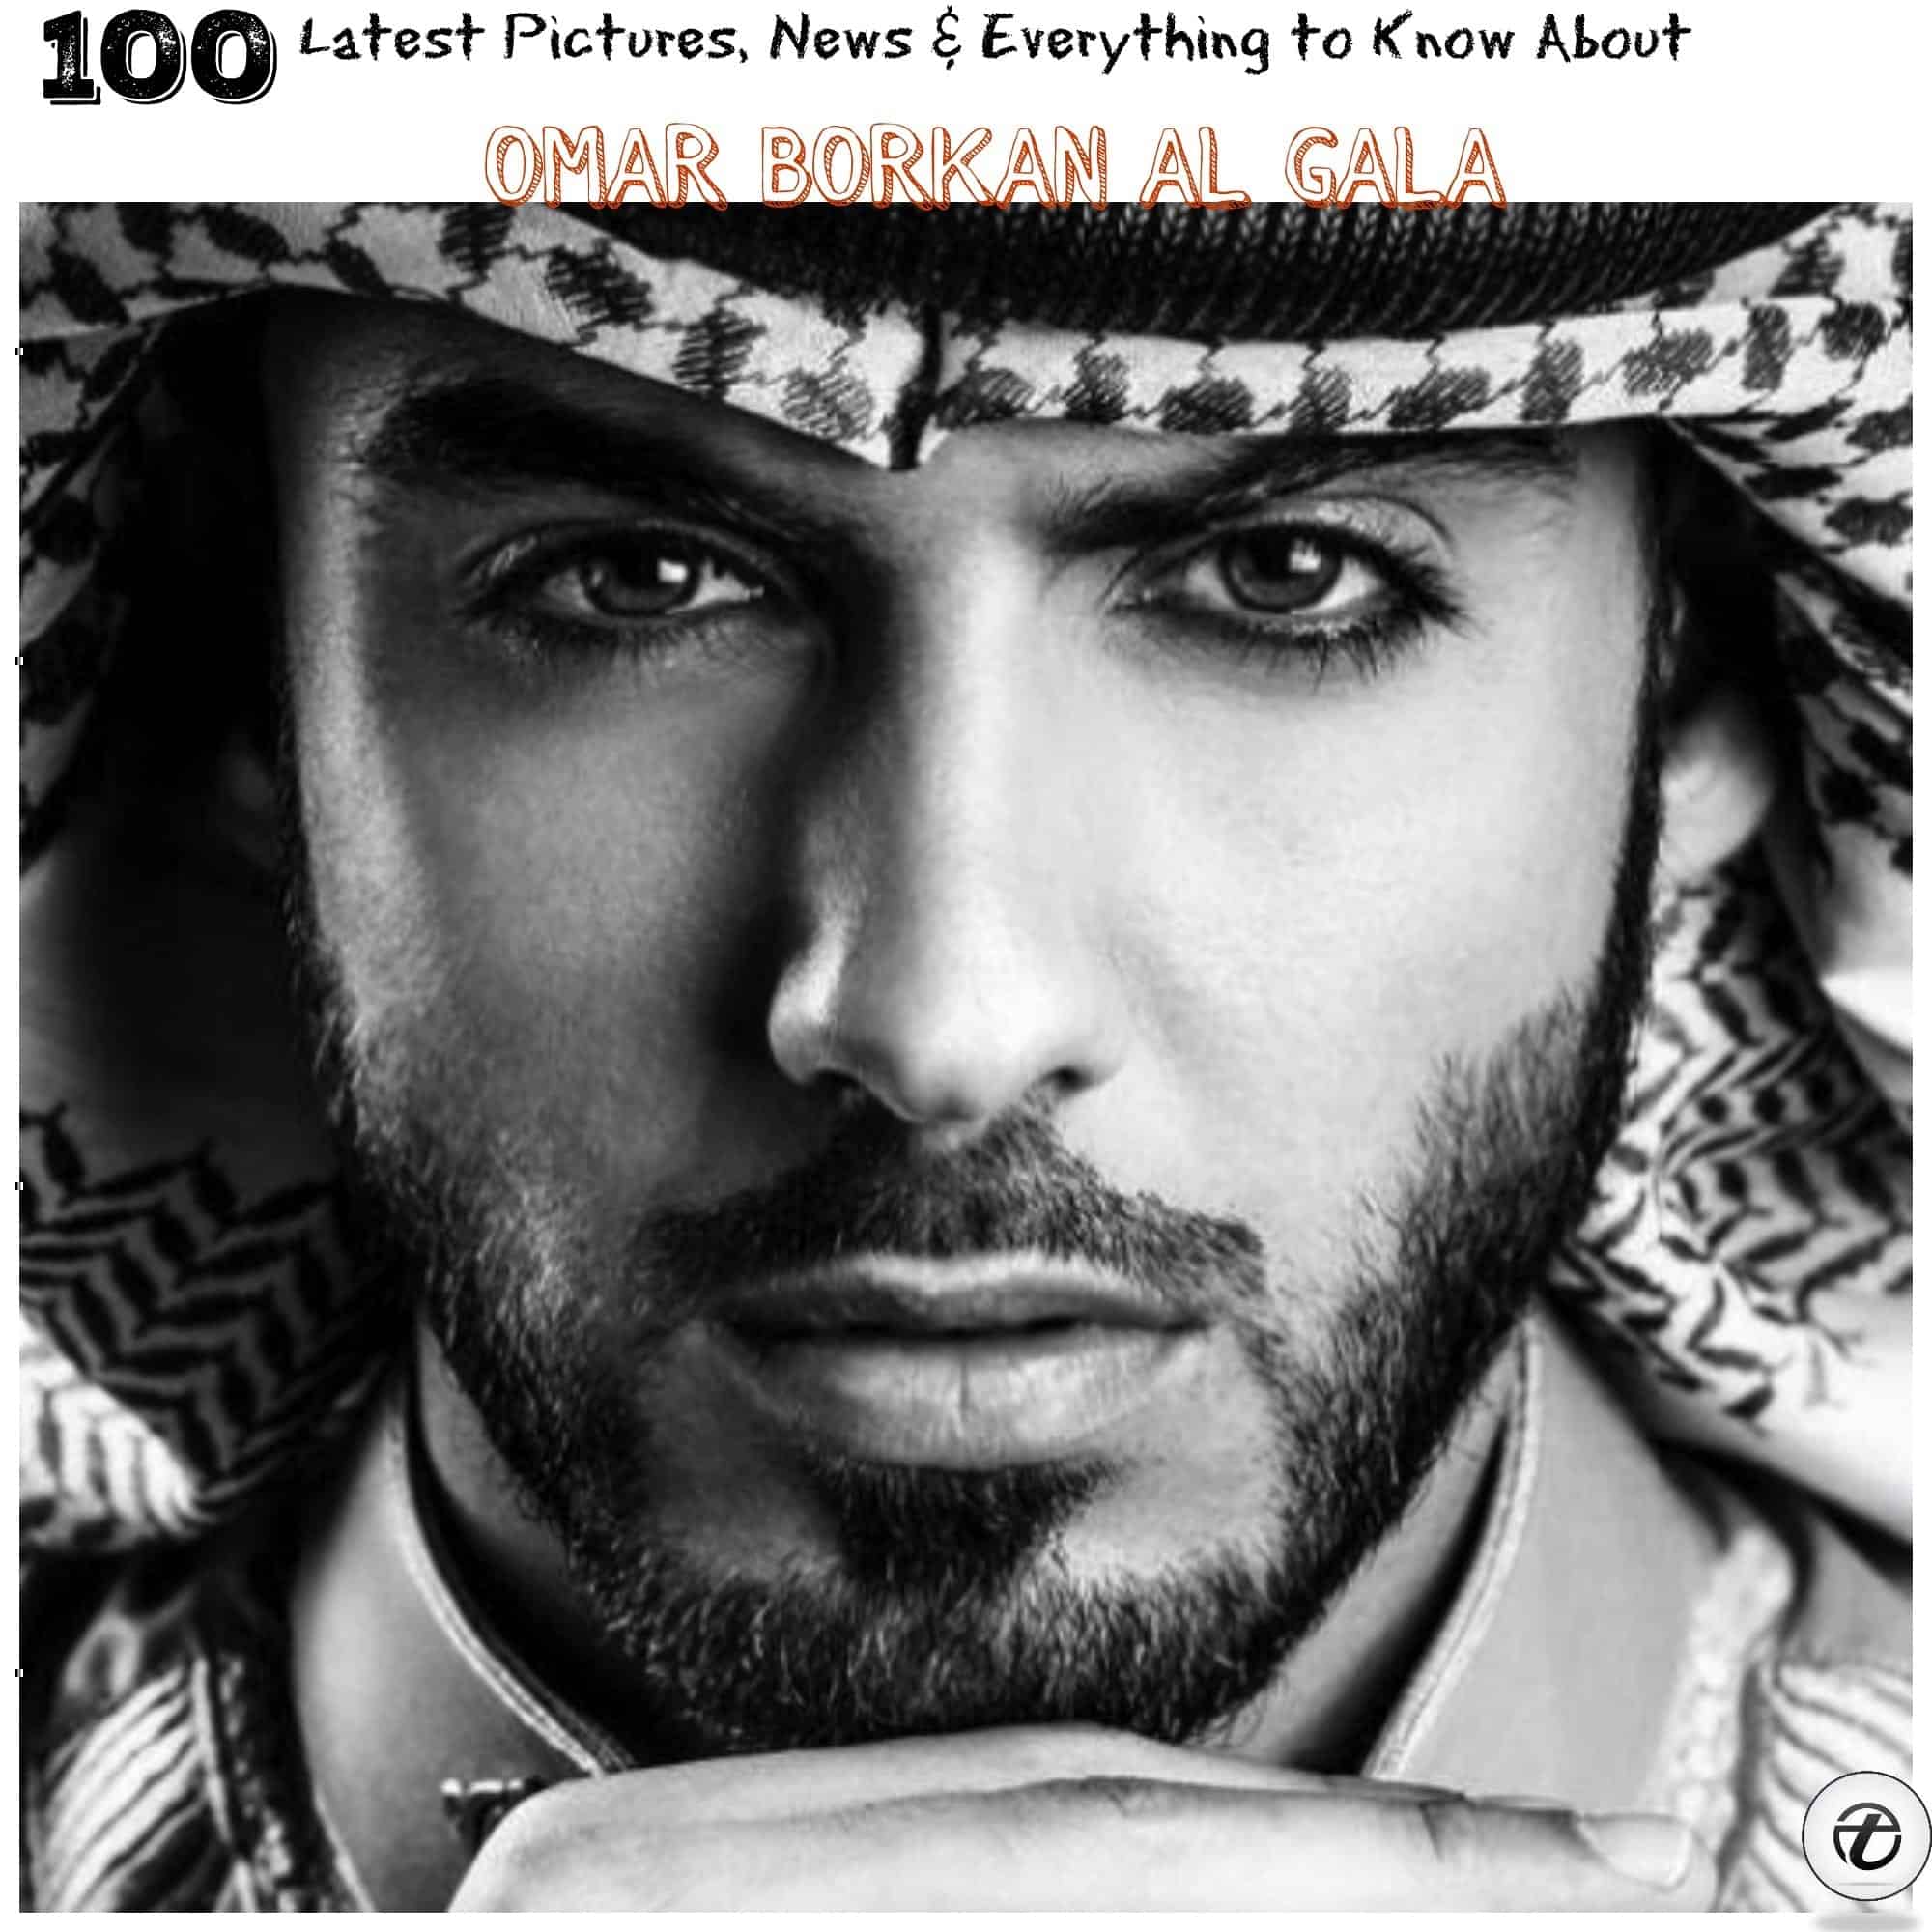 LATEST PICTURES OF OMAR BORKAN